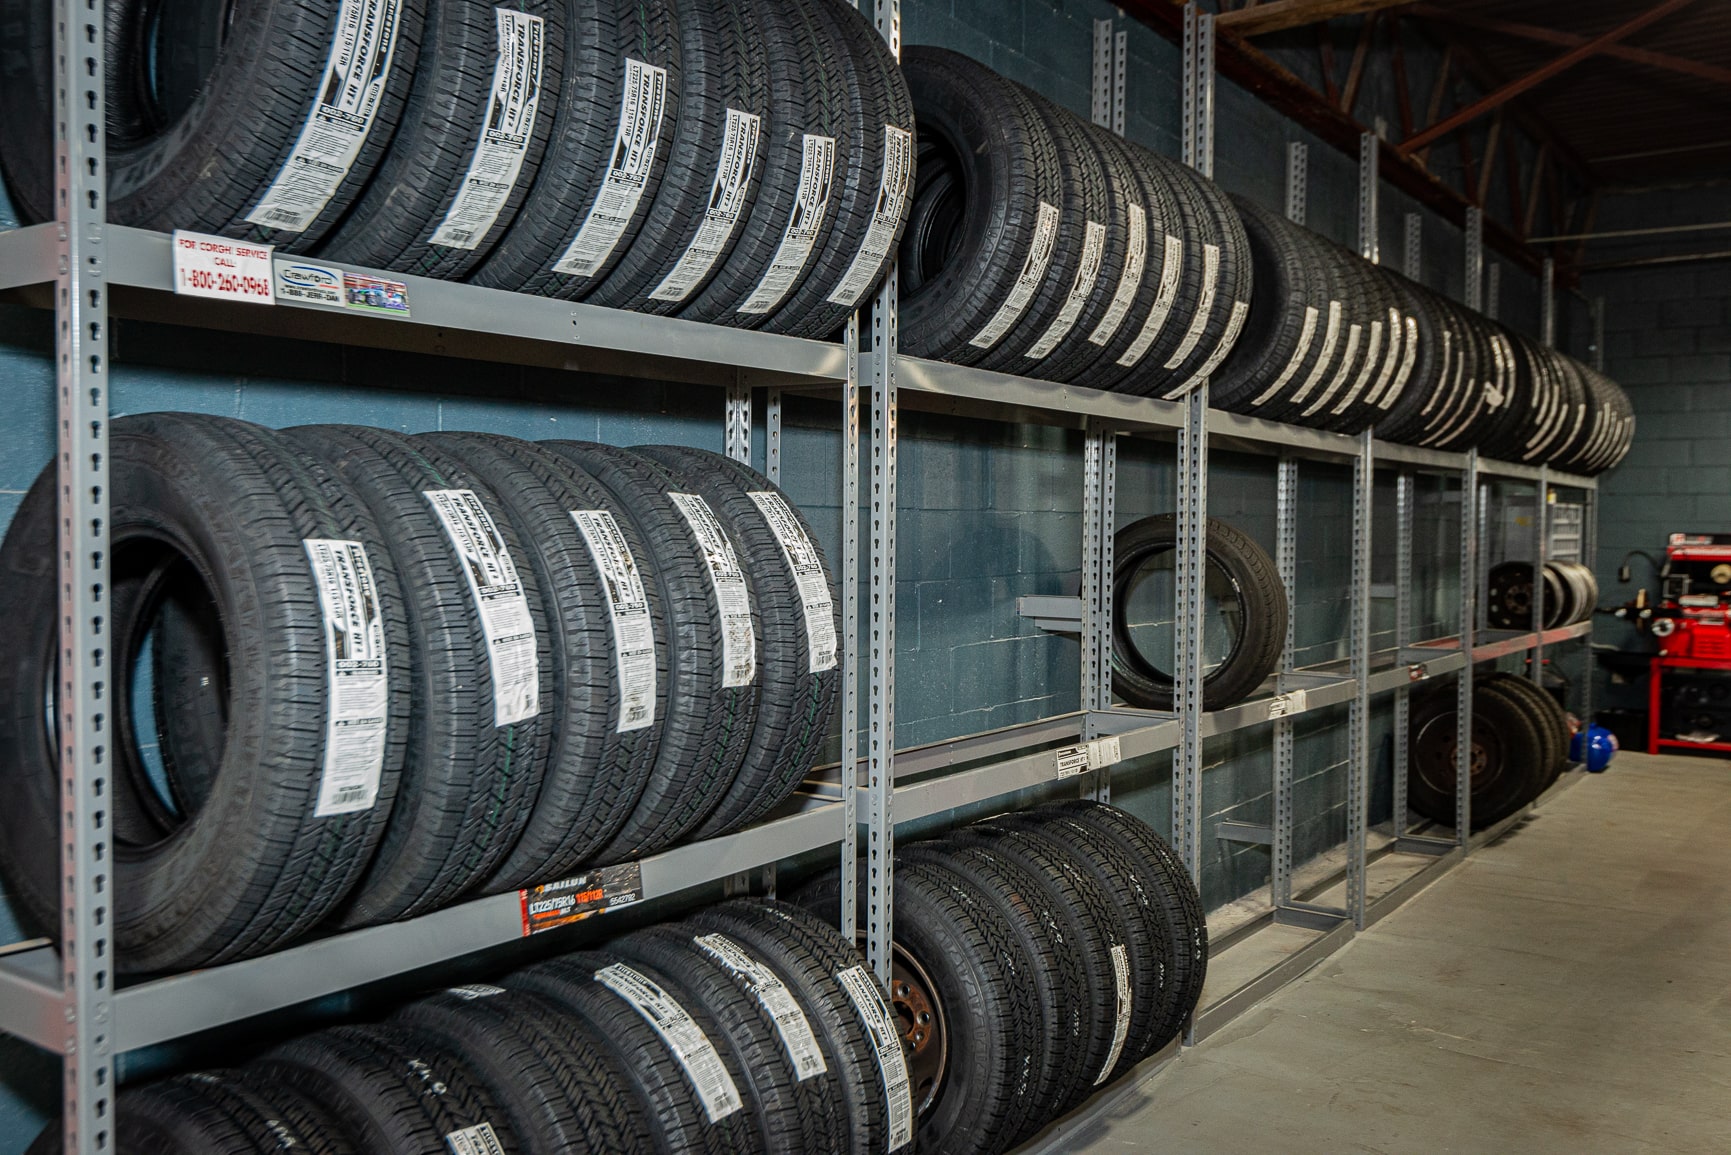 A wall of tires in a warehouse.